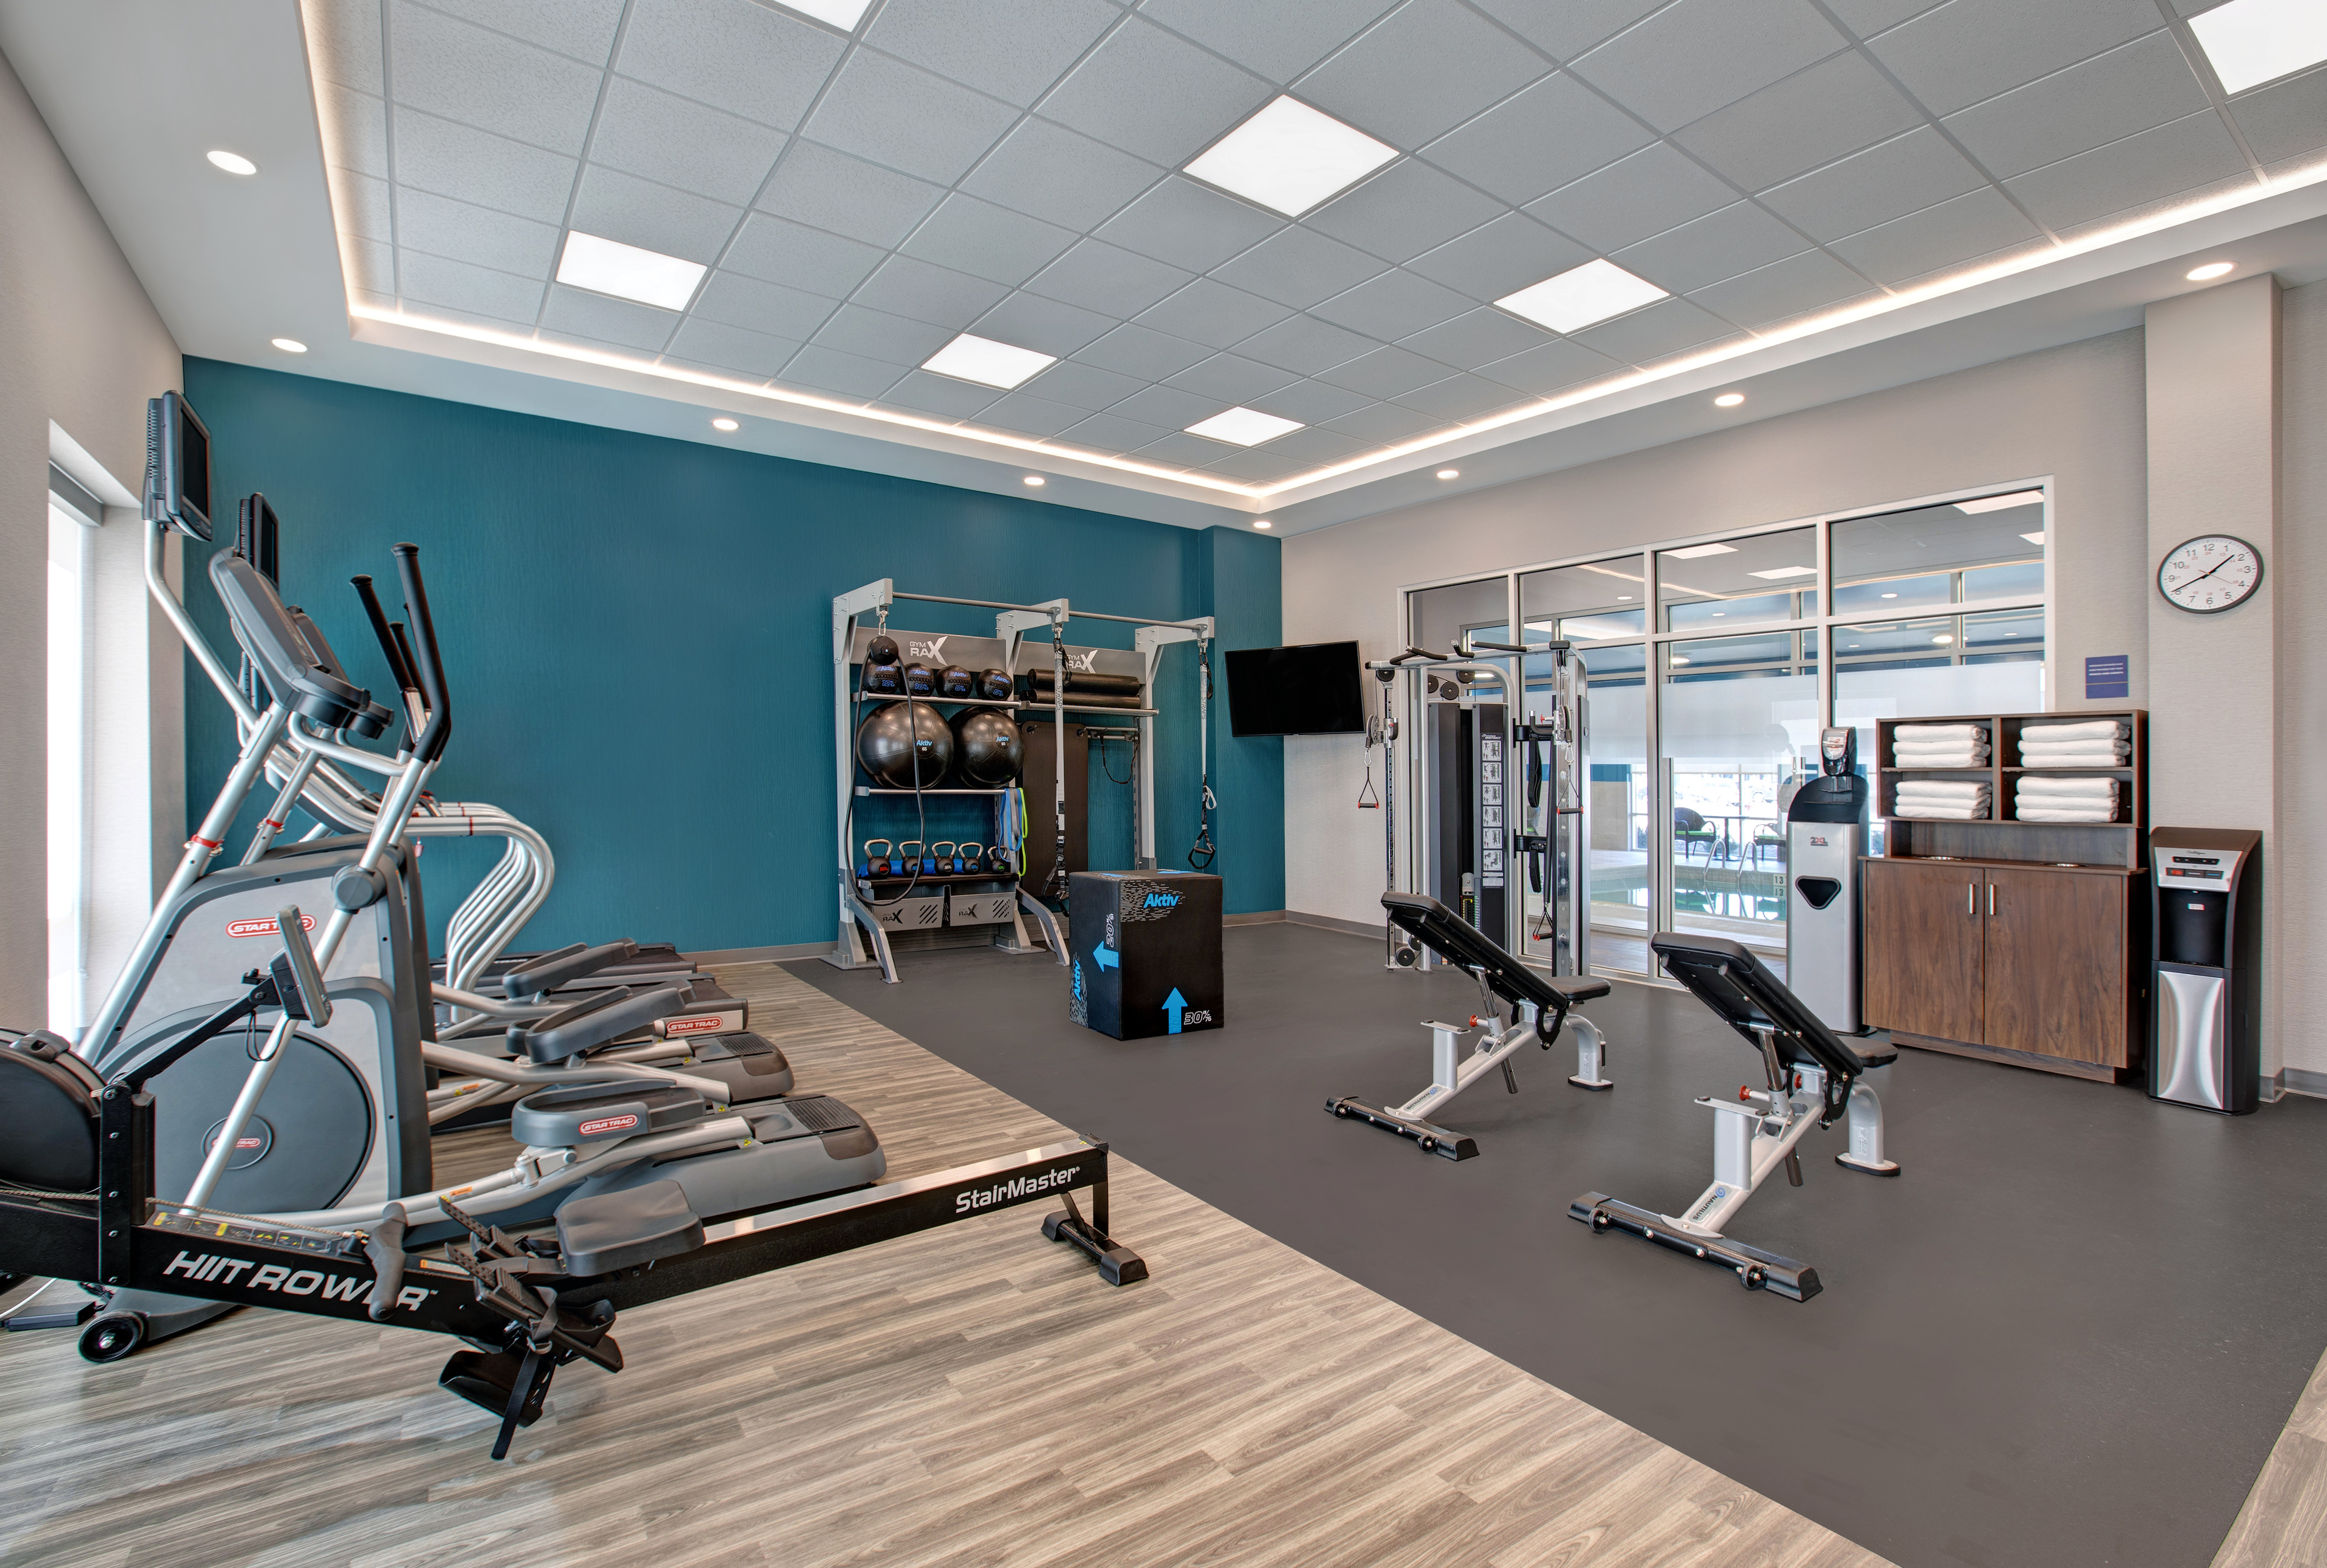 on-site fitness center, work out equipment